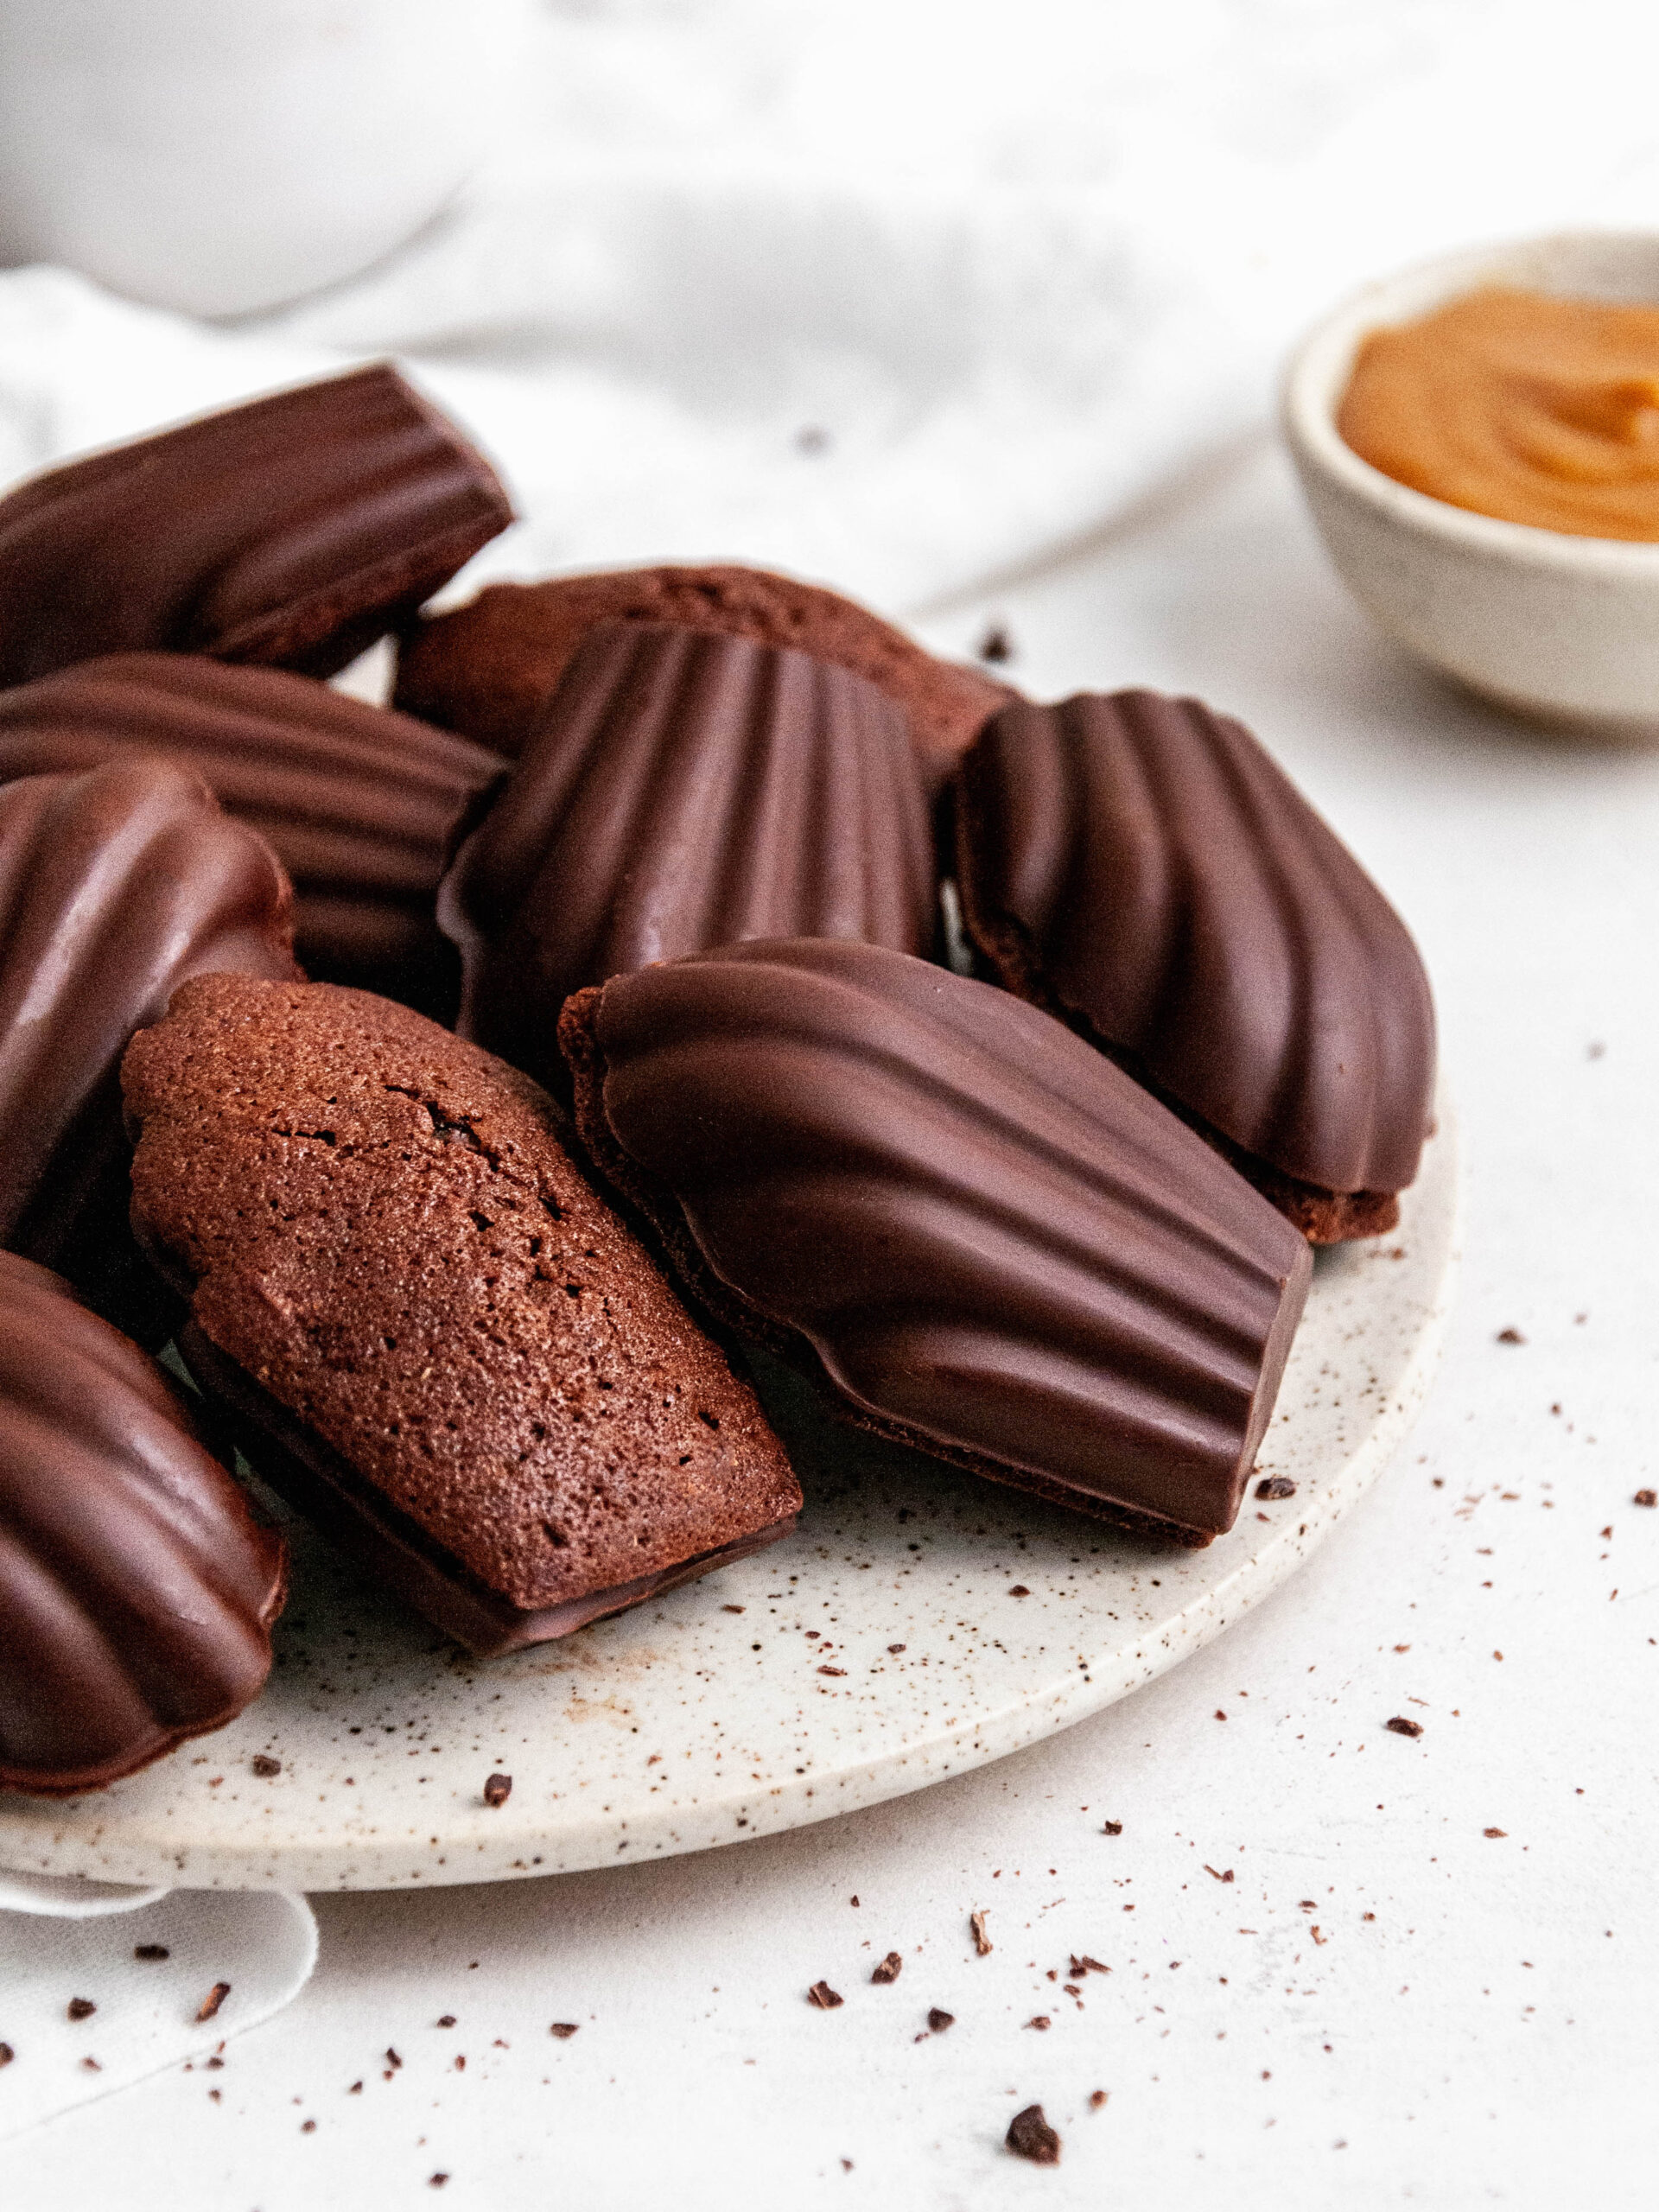 Chocolate madeleines with Dulce de Leche on a plate.